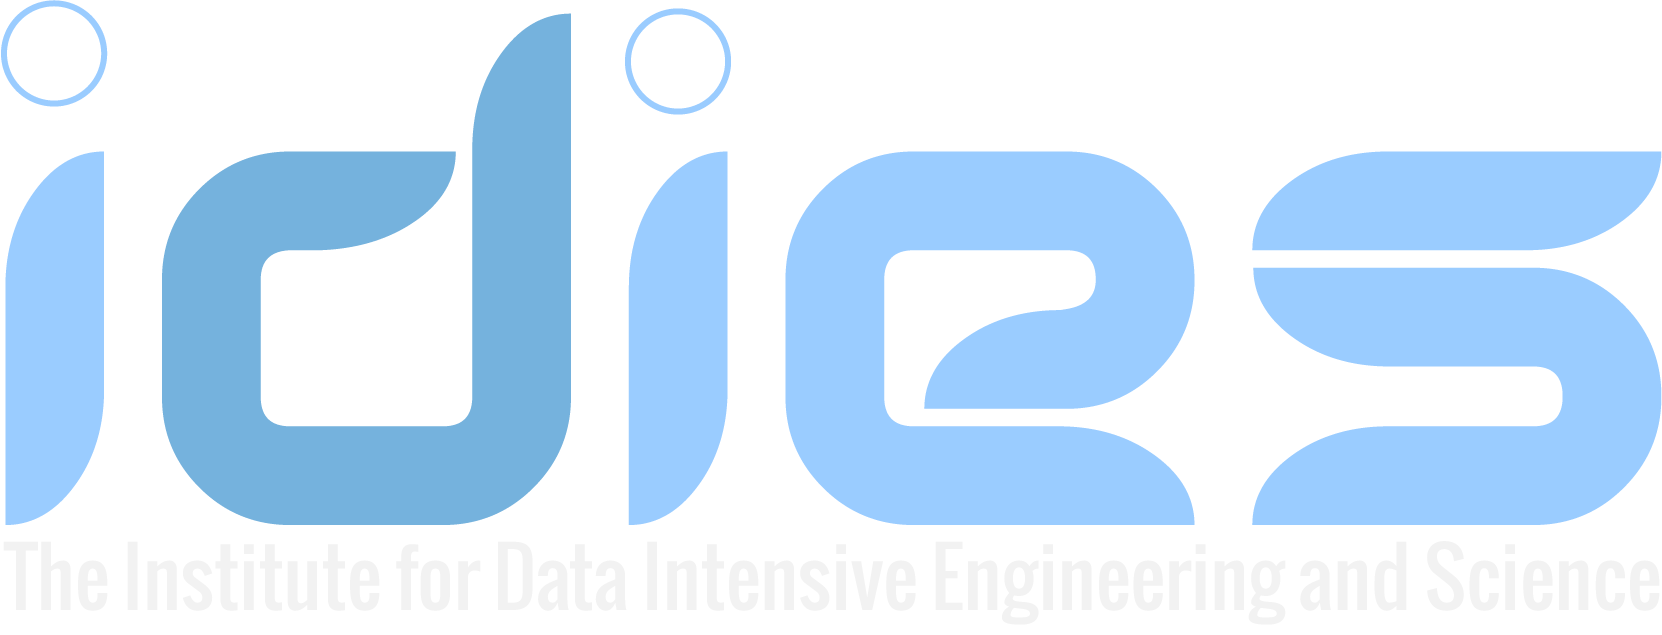 big-idies-logo-with-words.png